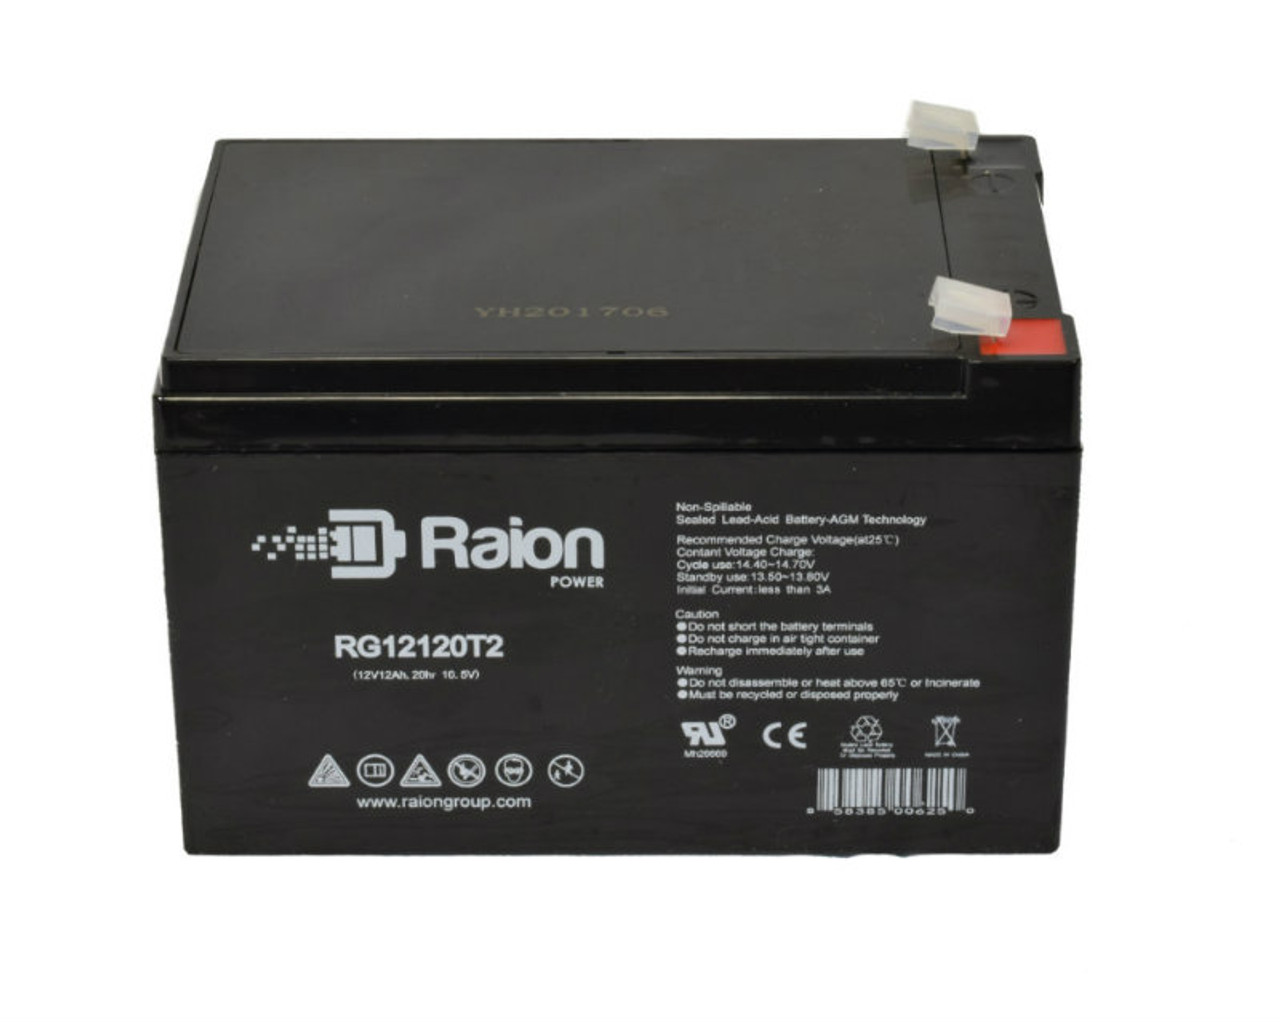 Raion Power RG12120T2 Replacement Battery Cartridge for Datashield 400